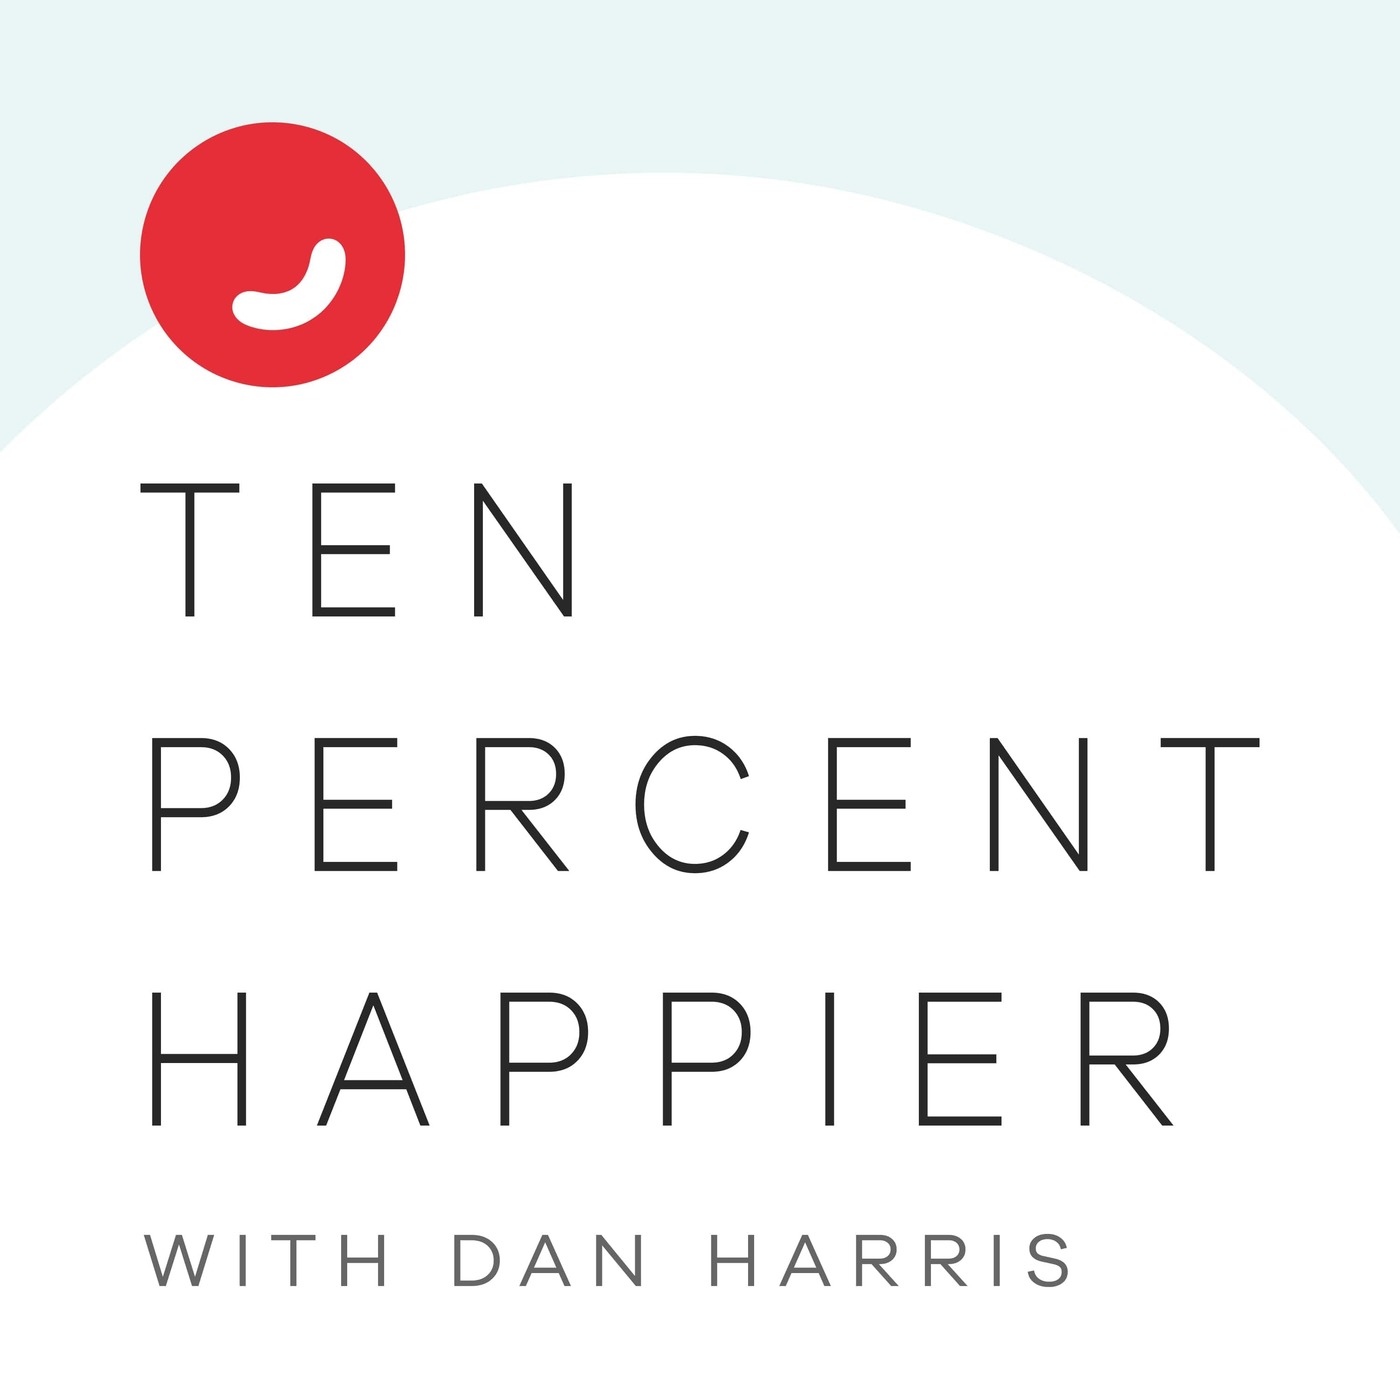 Ten percent happier podcast with Dan Harris logo - Mental wellbeing podcasts